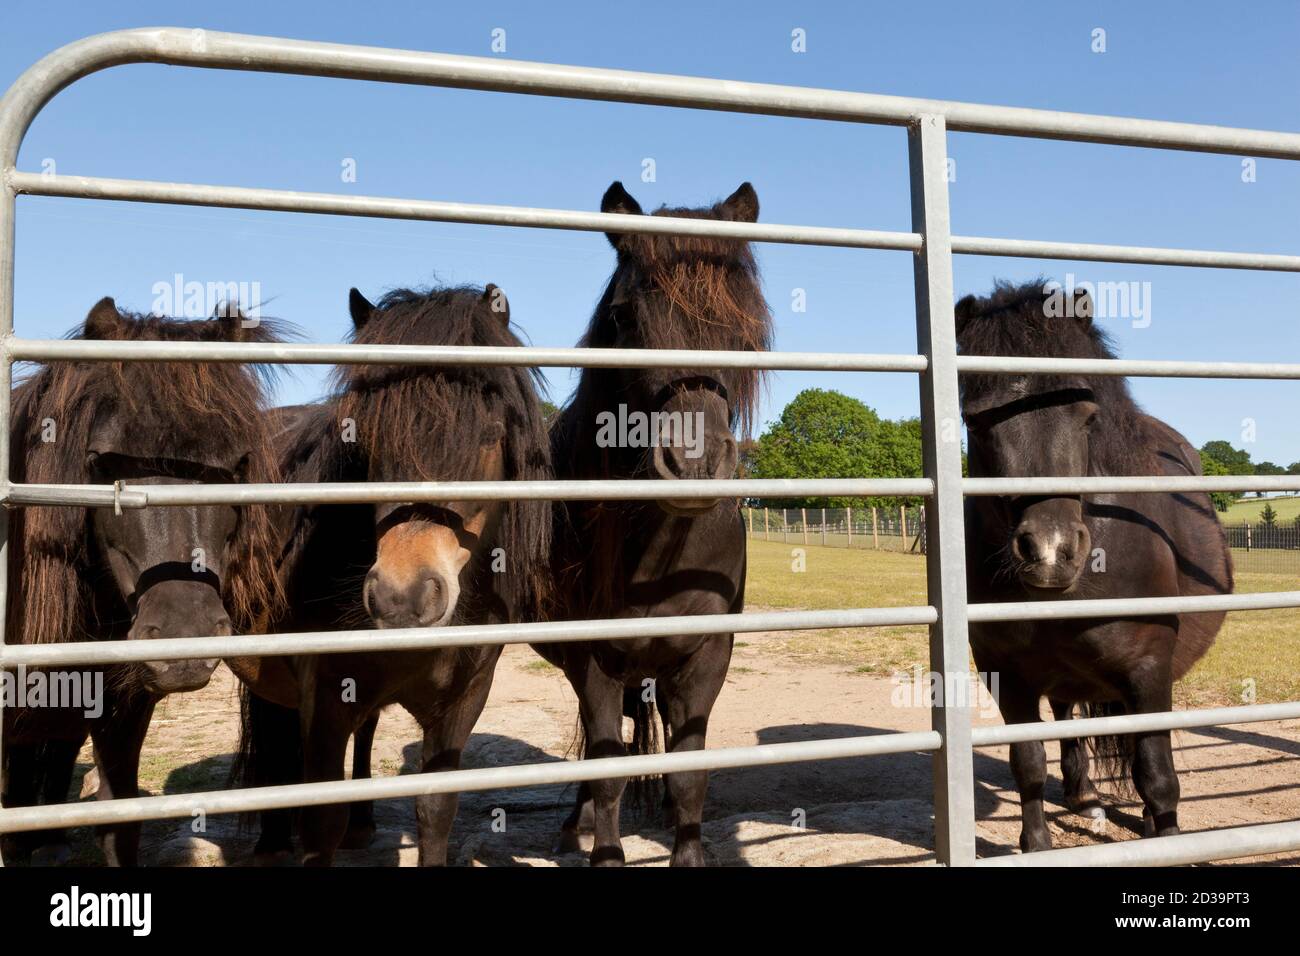 Four ponies behind the bars of a metal gate Stock Photo